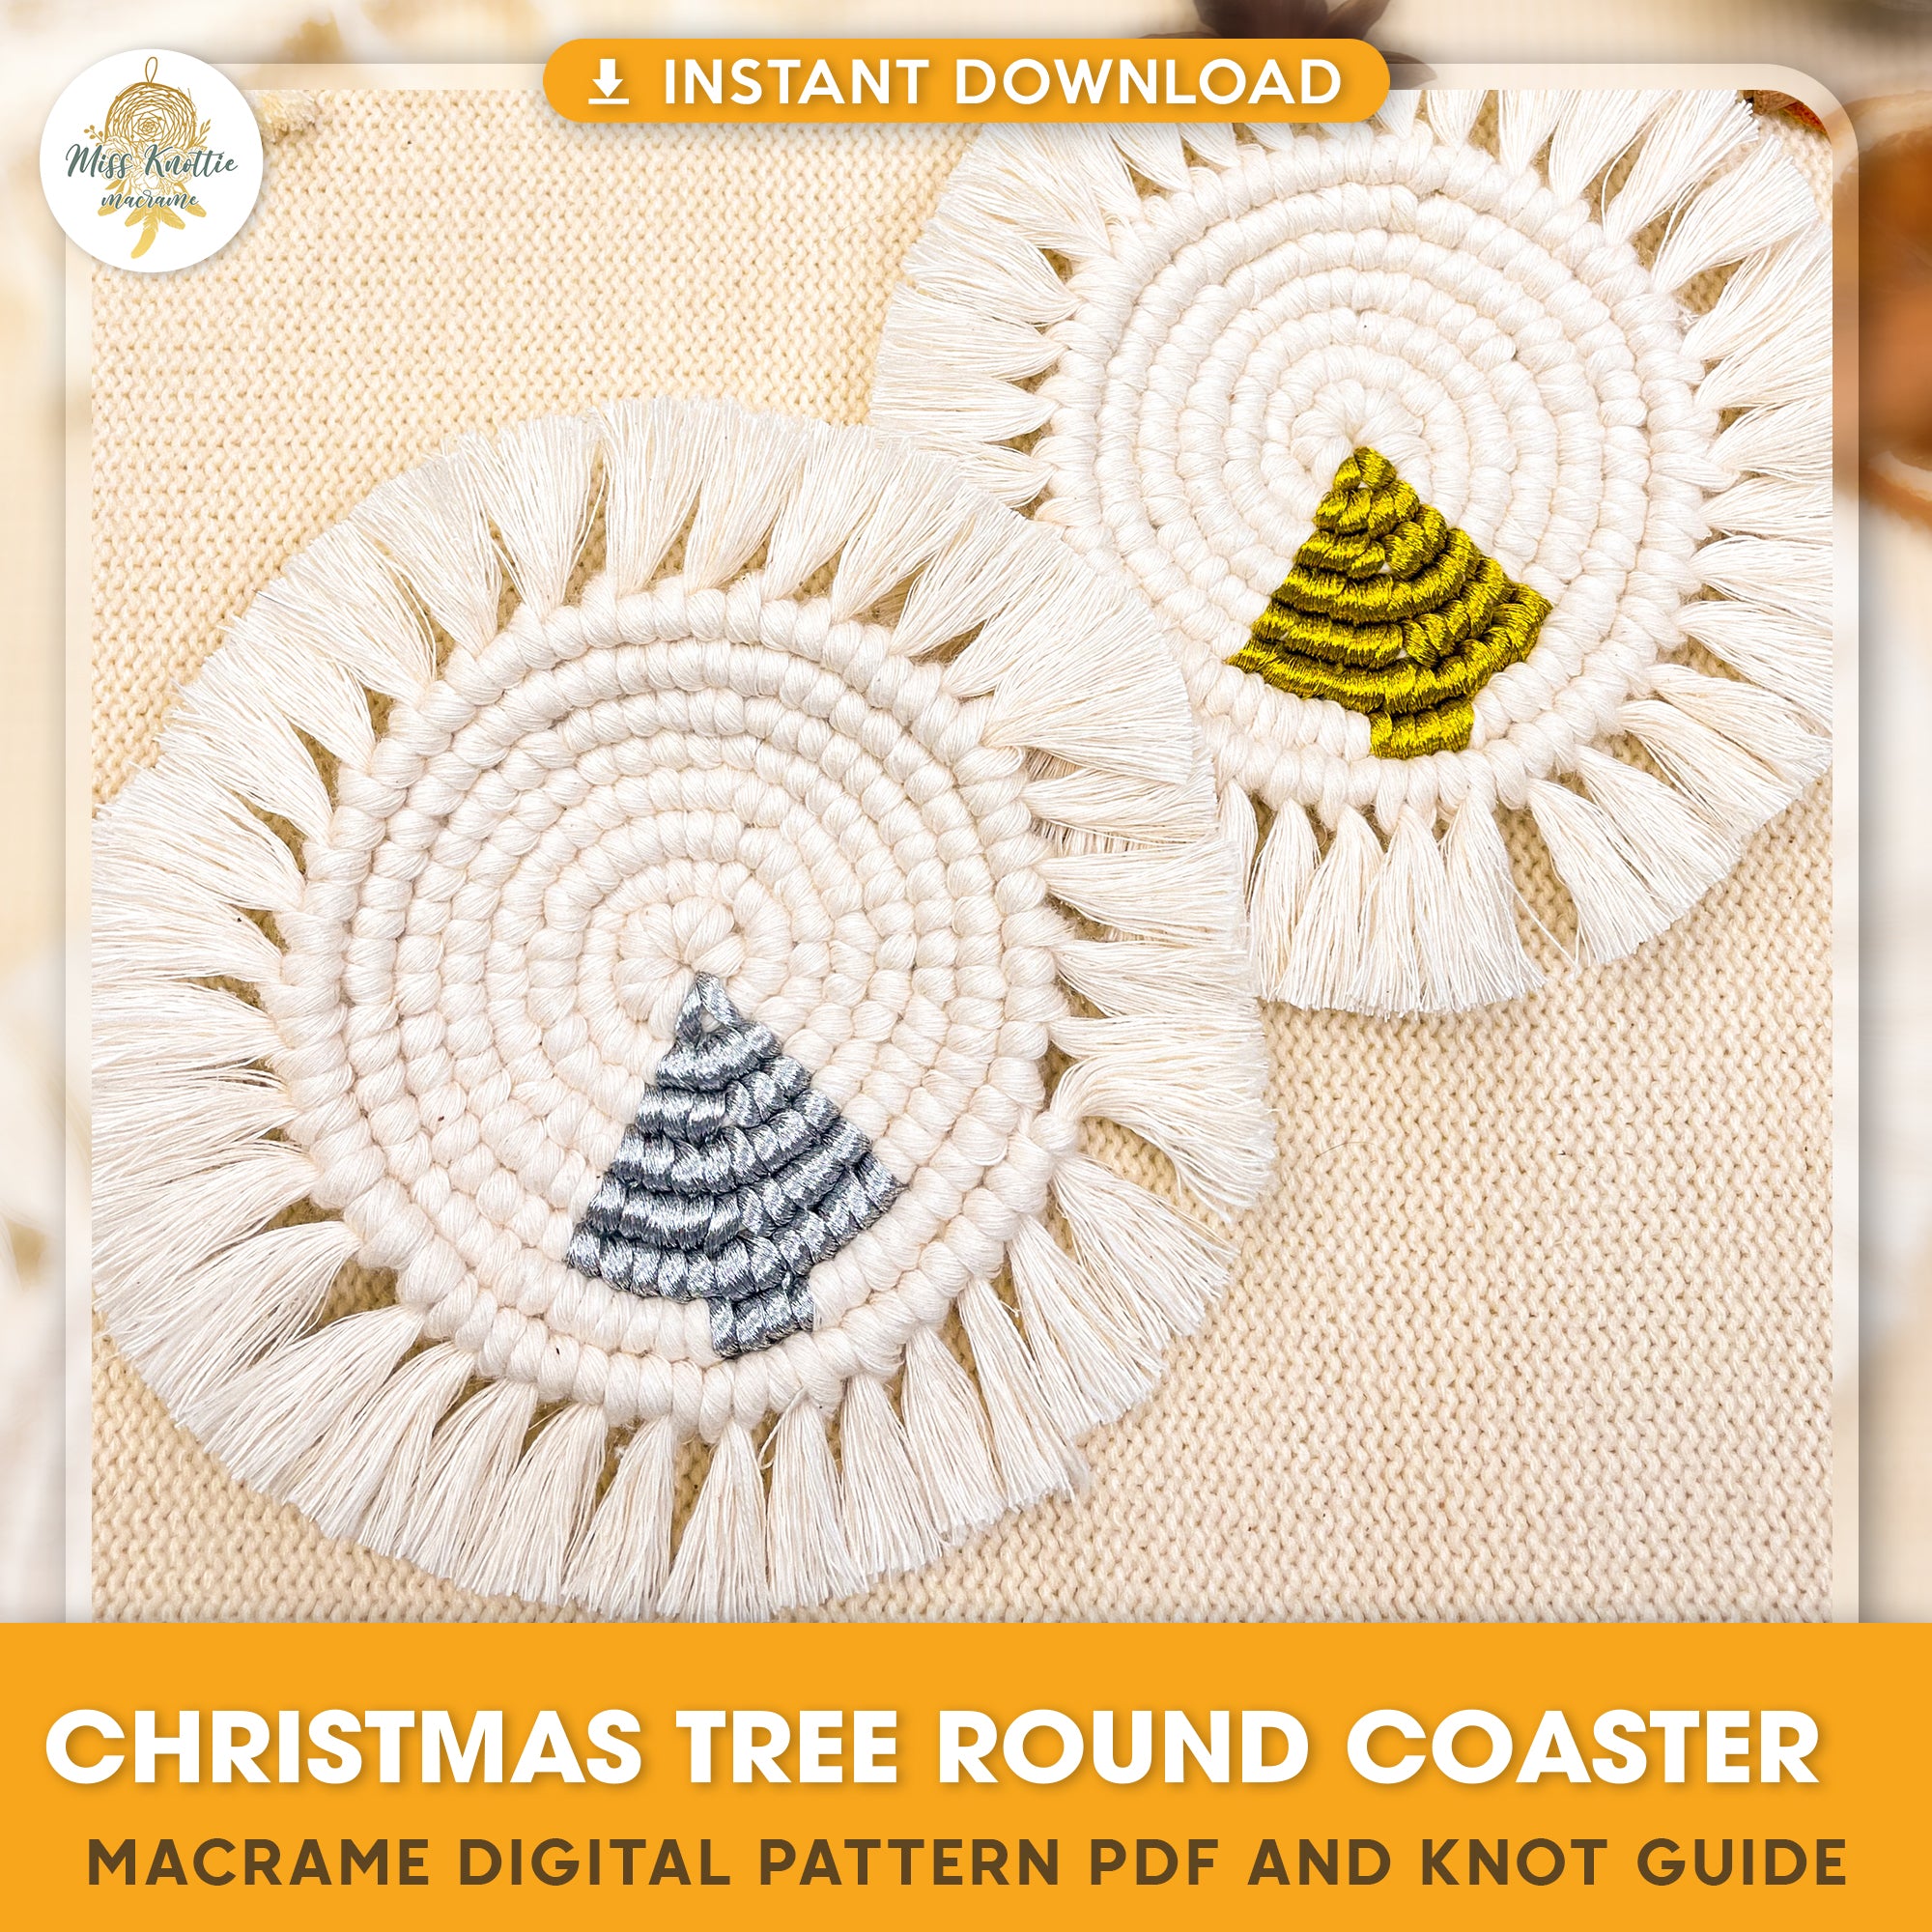 Christmas Tree Round Coaster - Digital PDF and Knot Guide